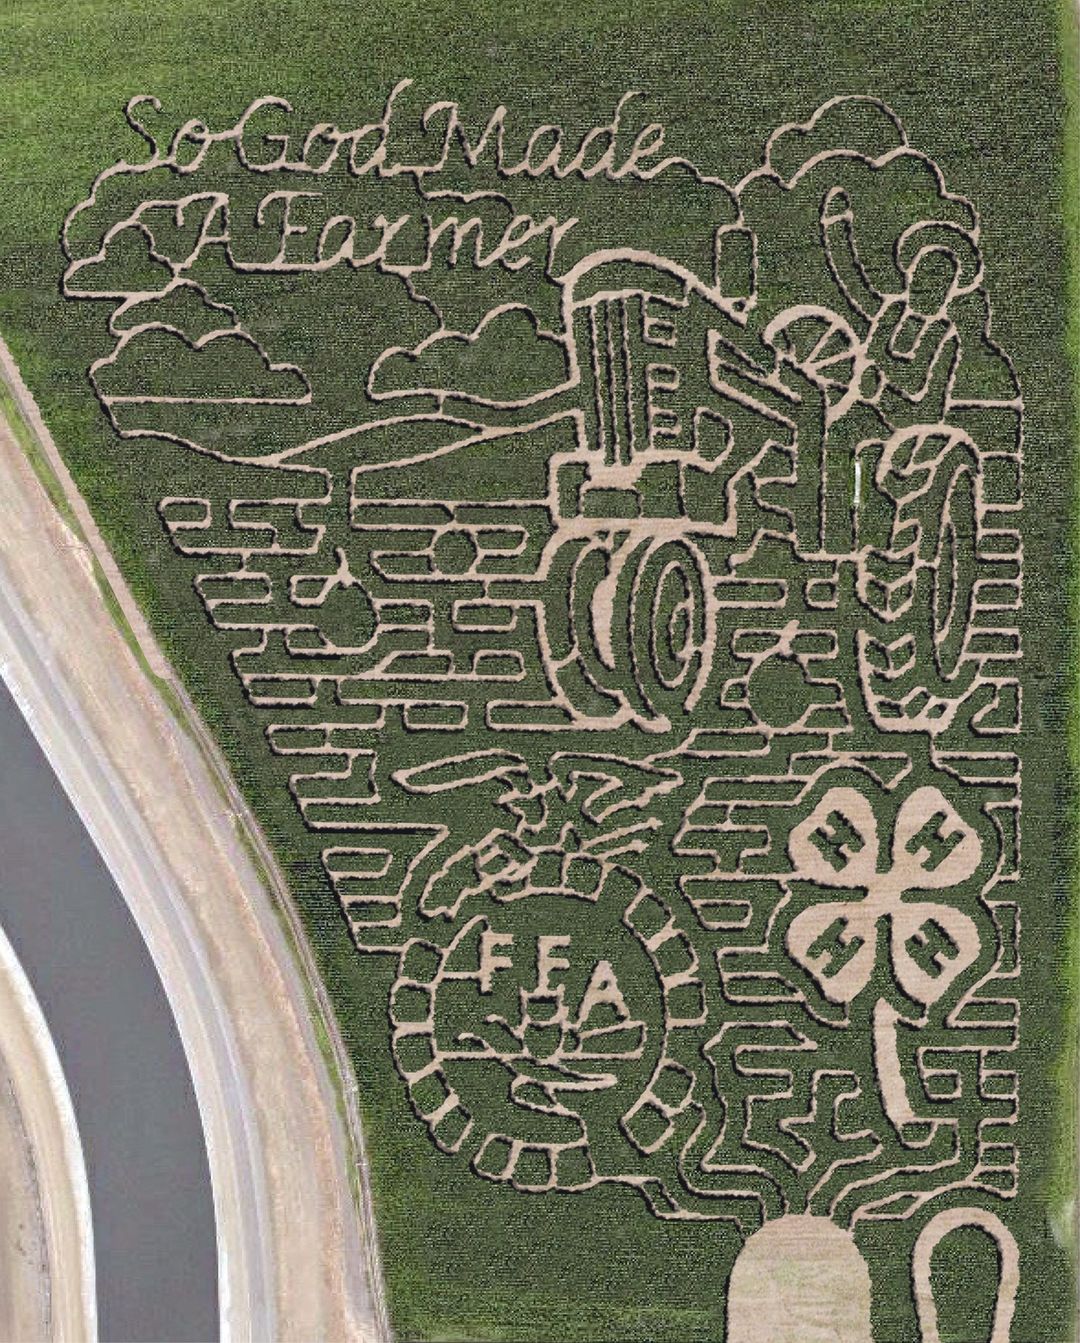 Aerial view of a corn maze